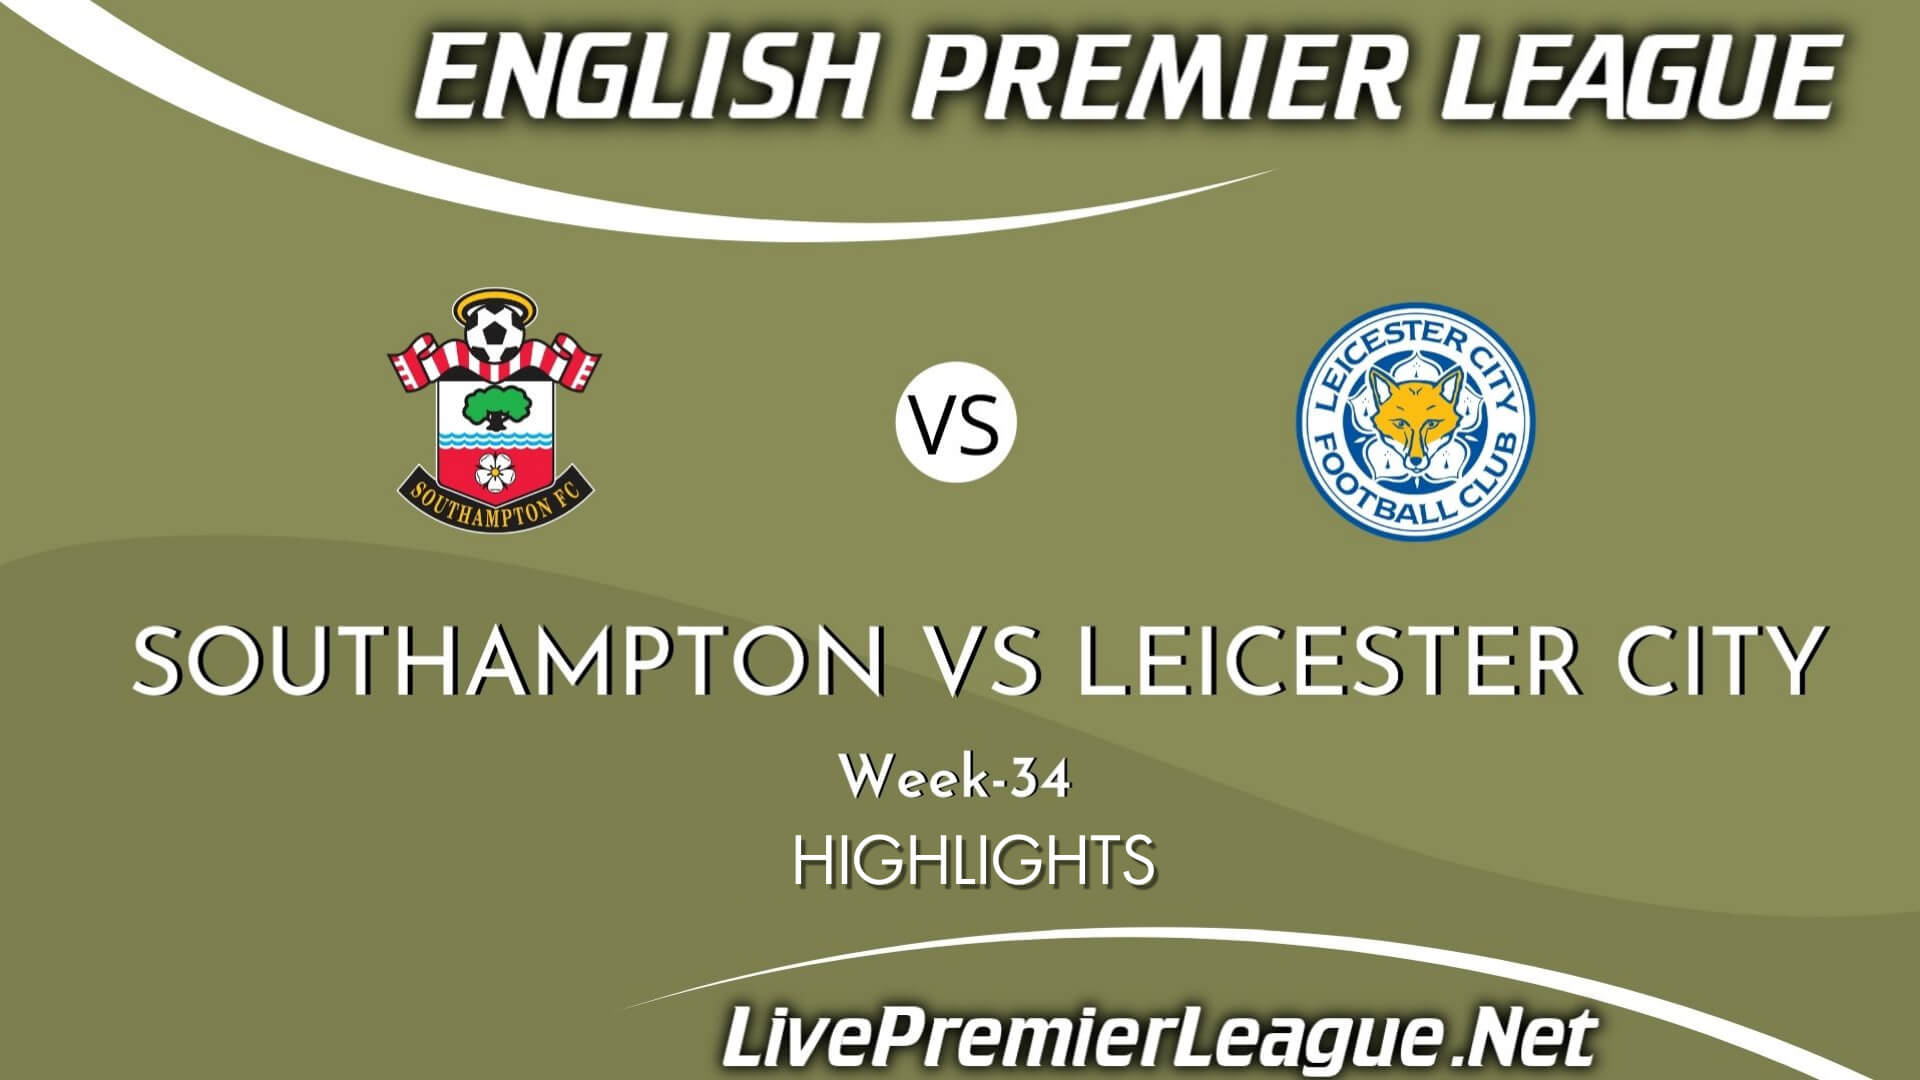 Southampton Vs Leicester City Highlights 2021 Week 34